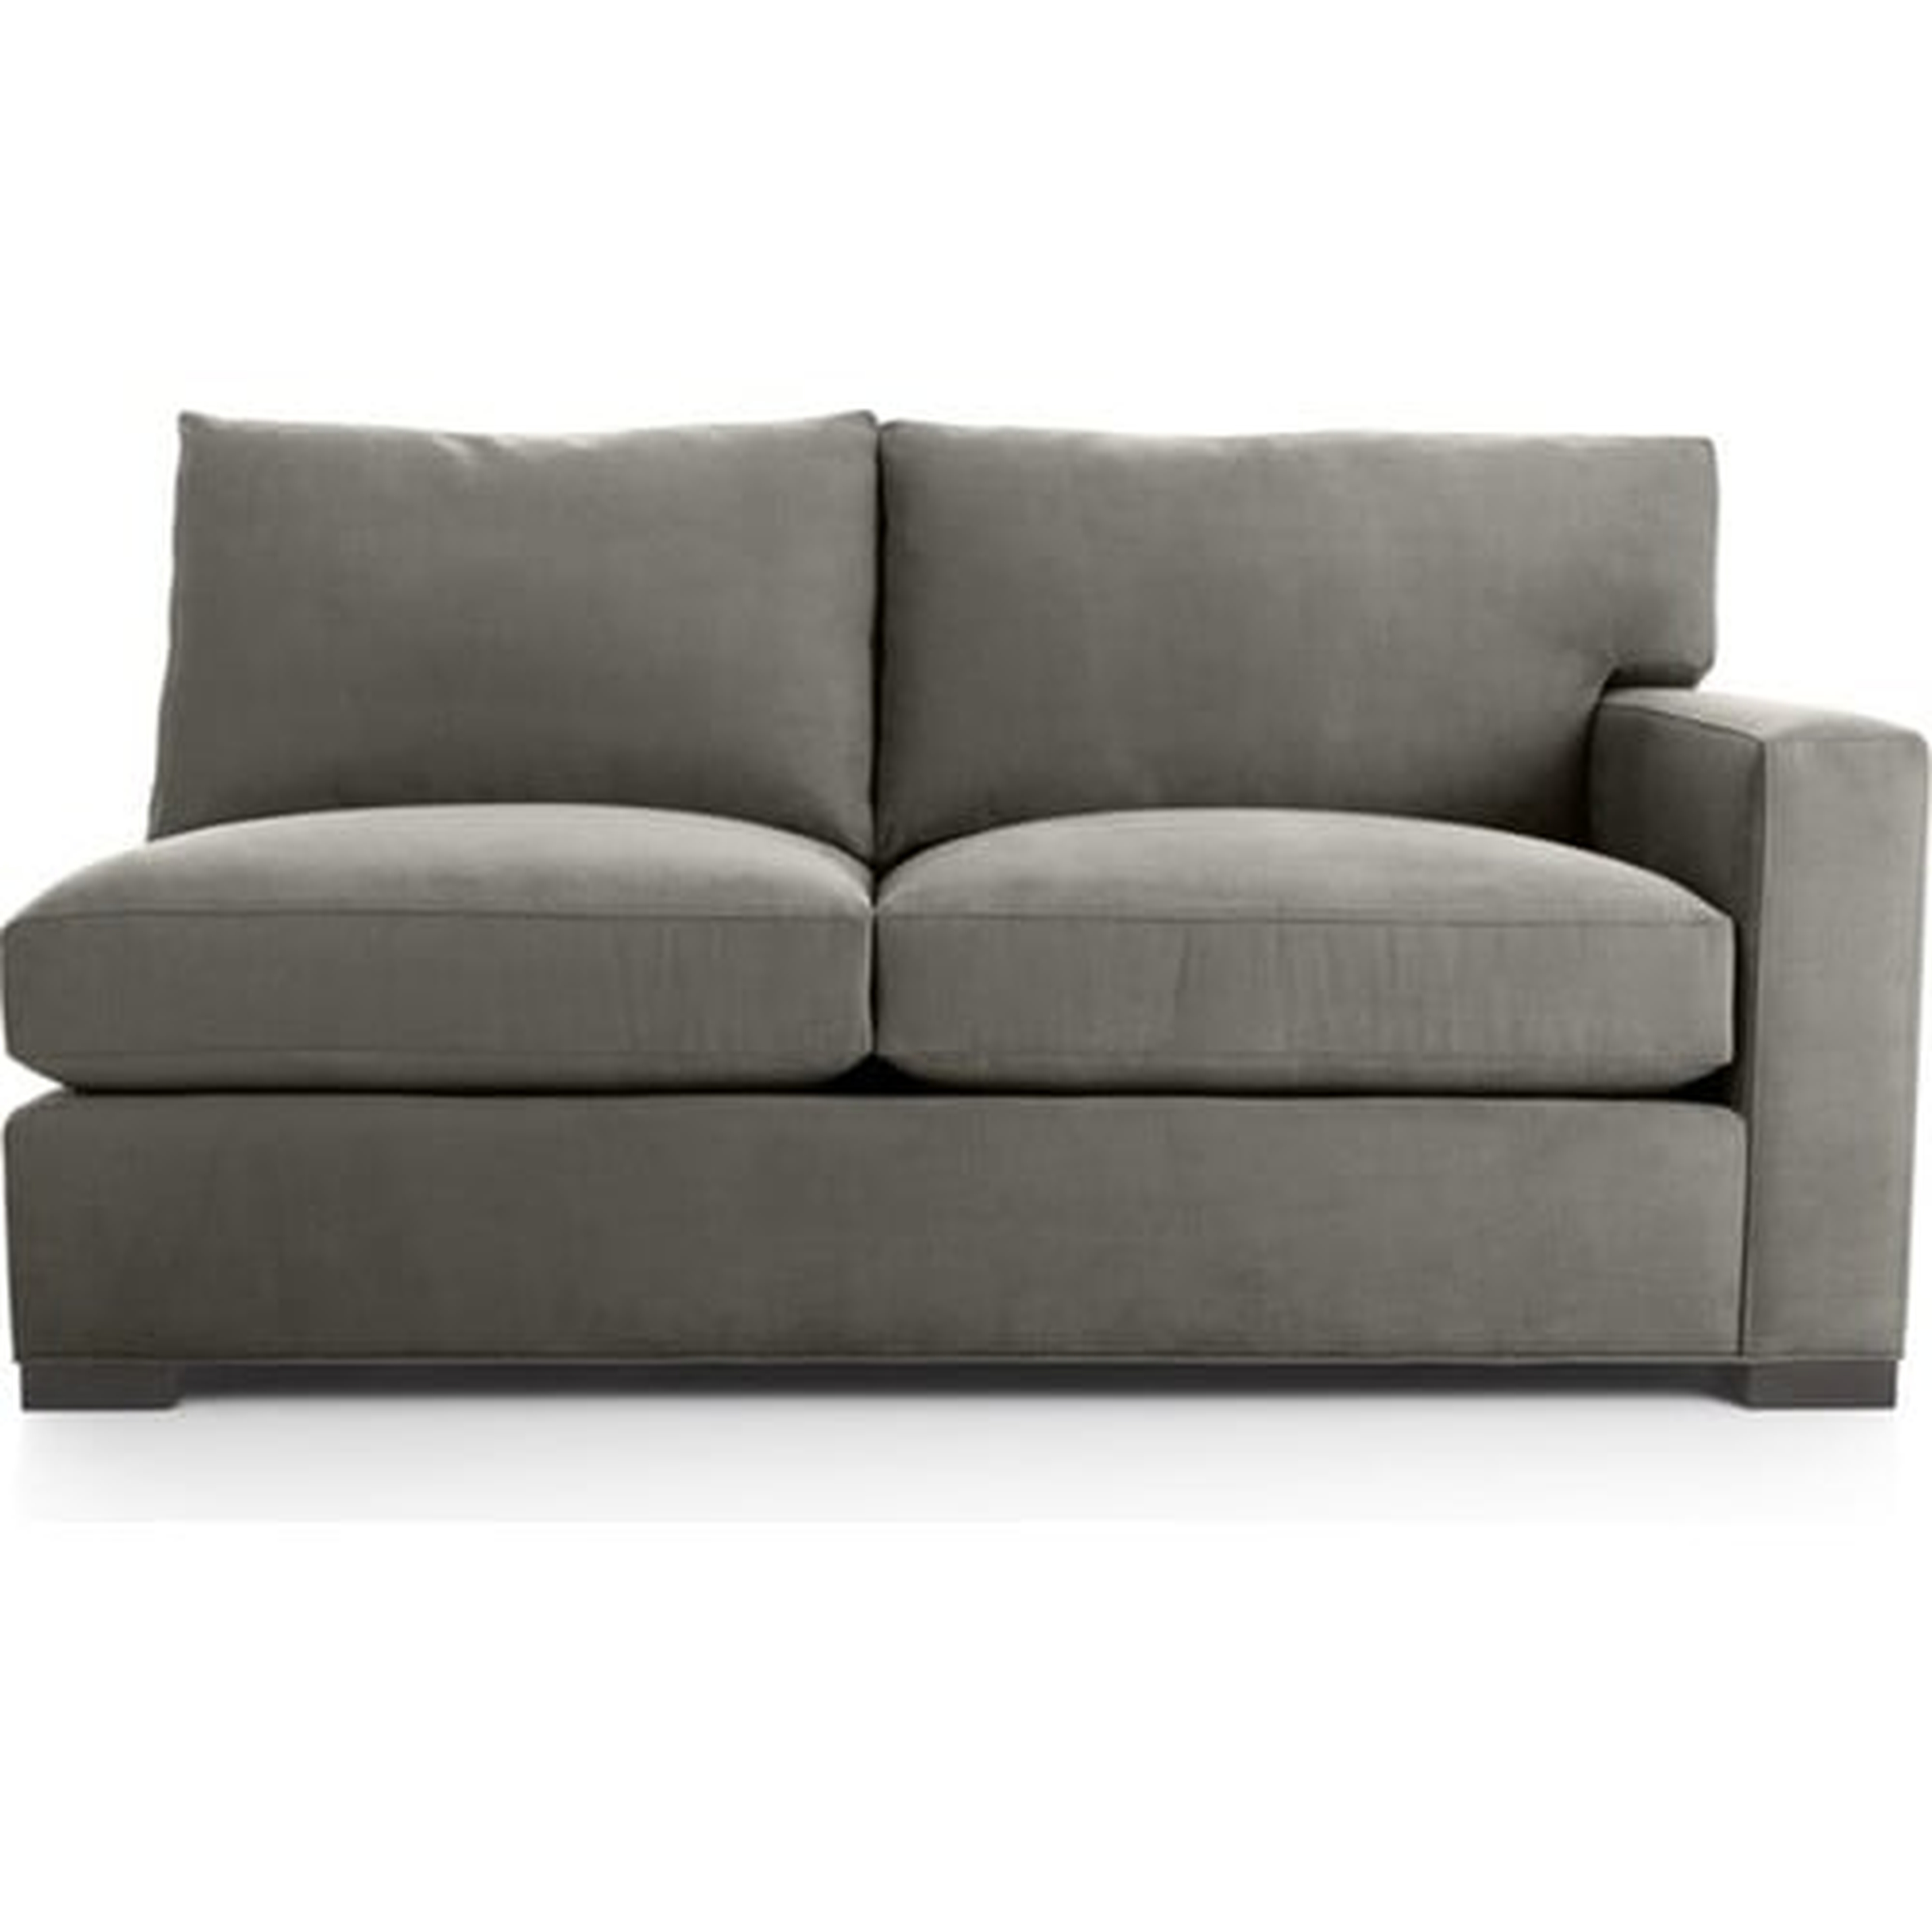 Axis II Right Arm Apartment Sofa - Crate and Barrel